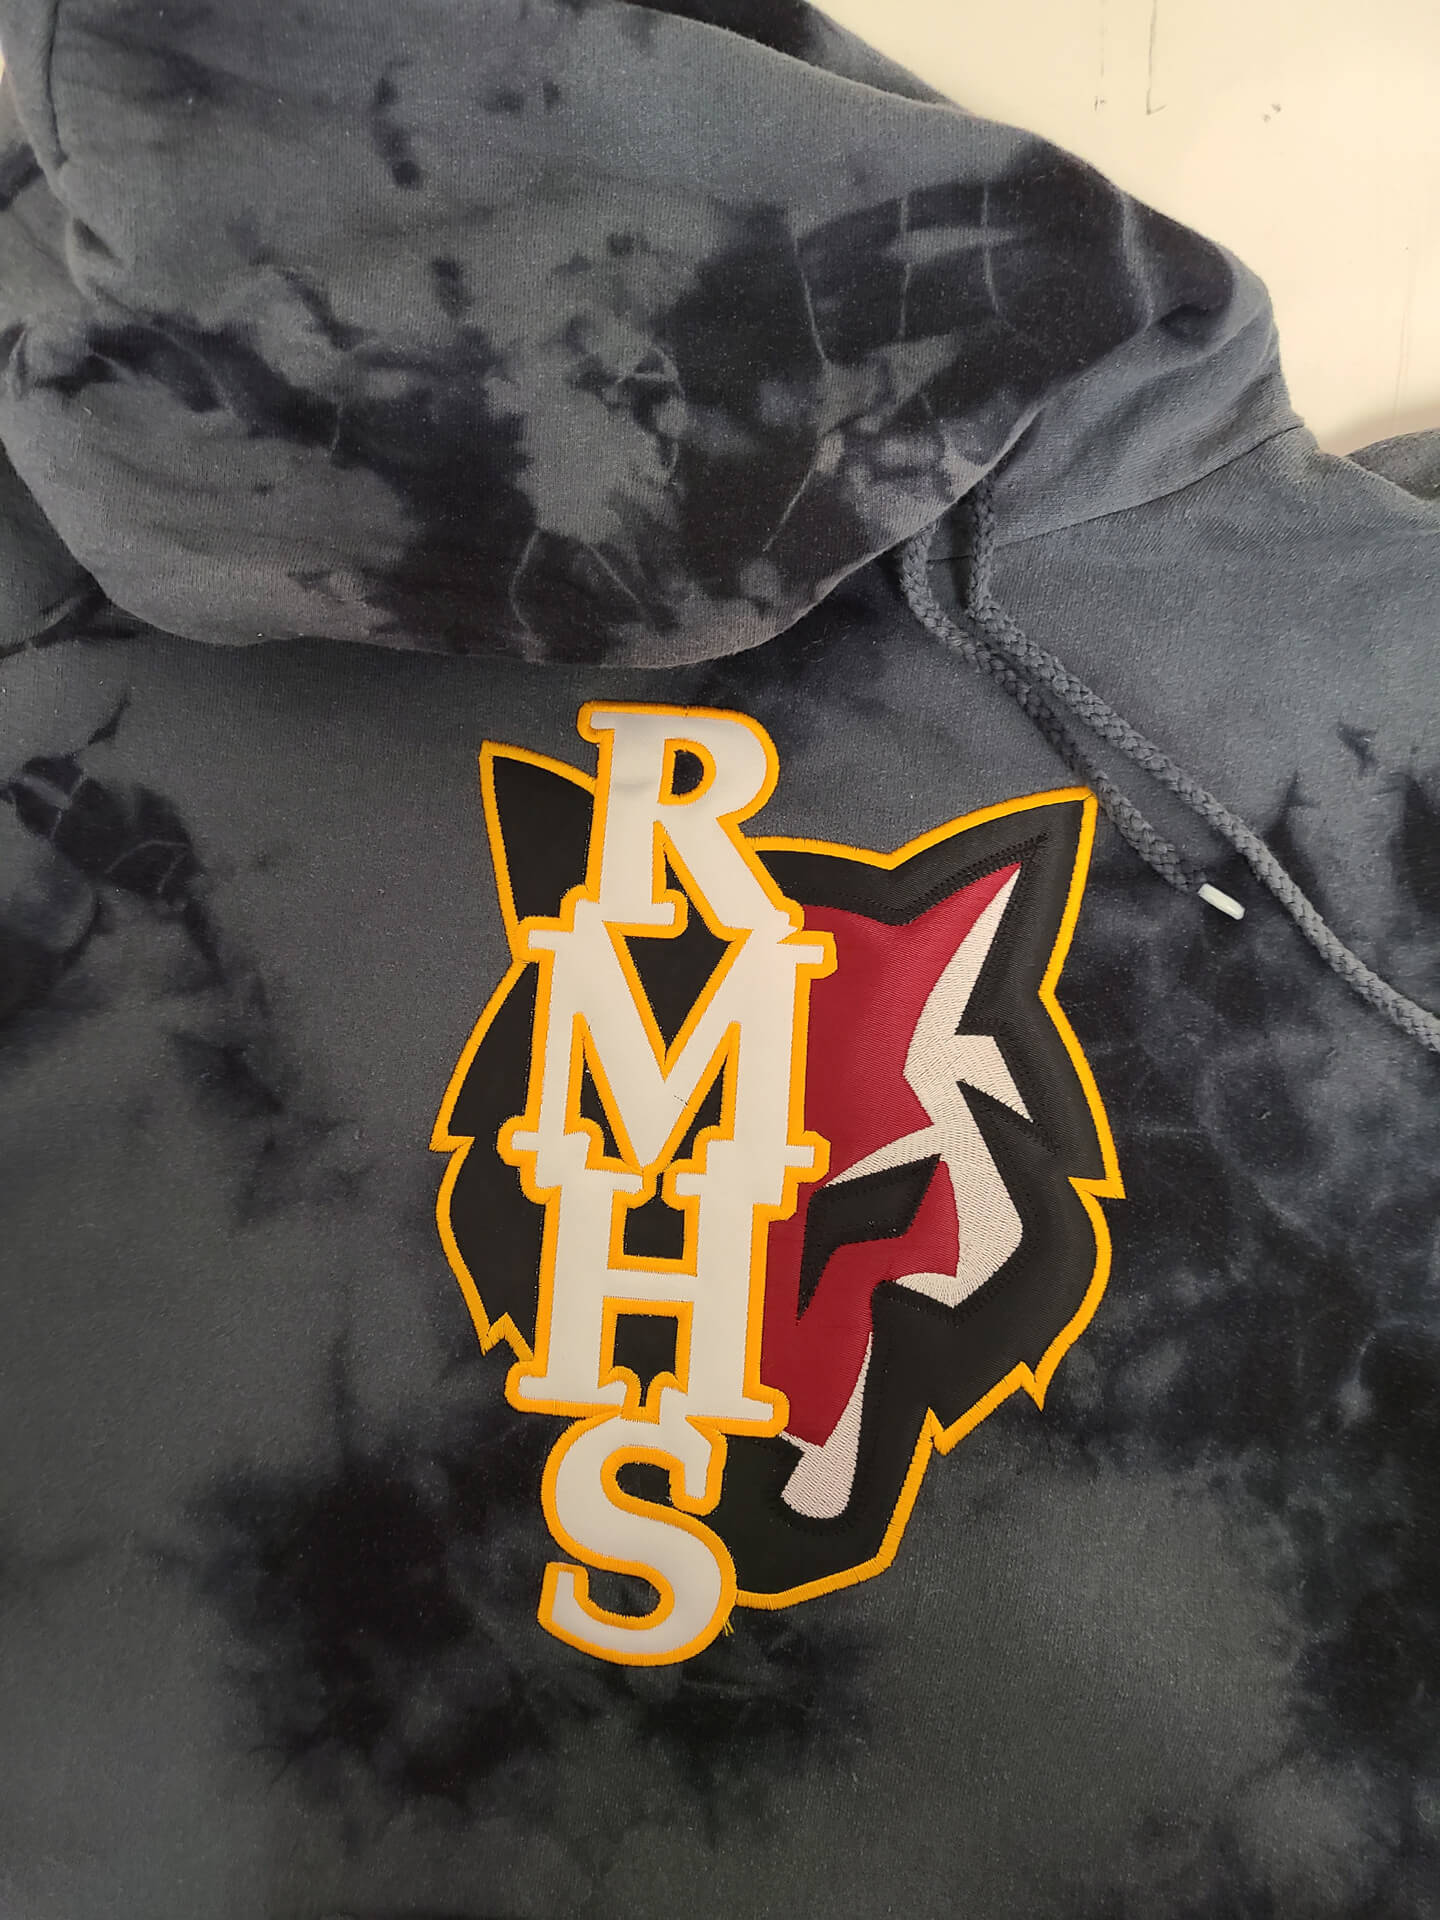 Personalized Twill Printing on Hoodies